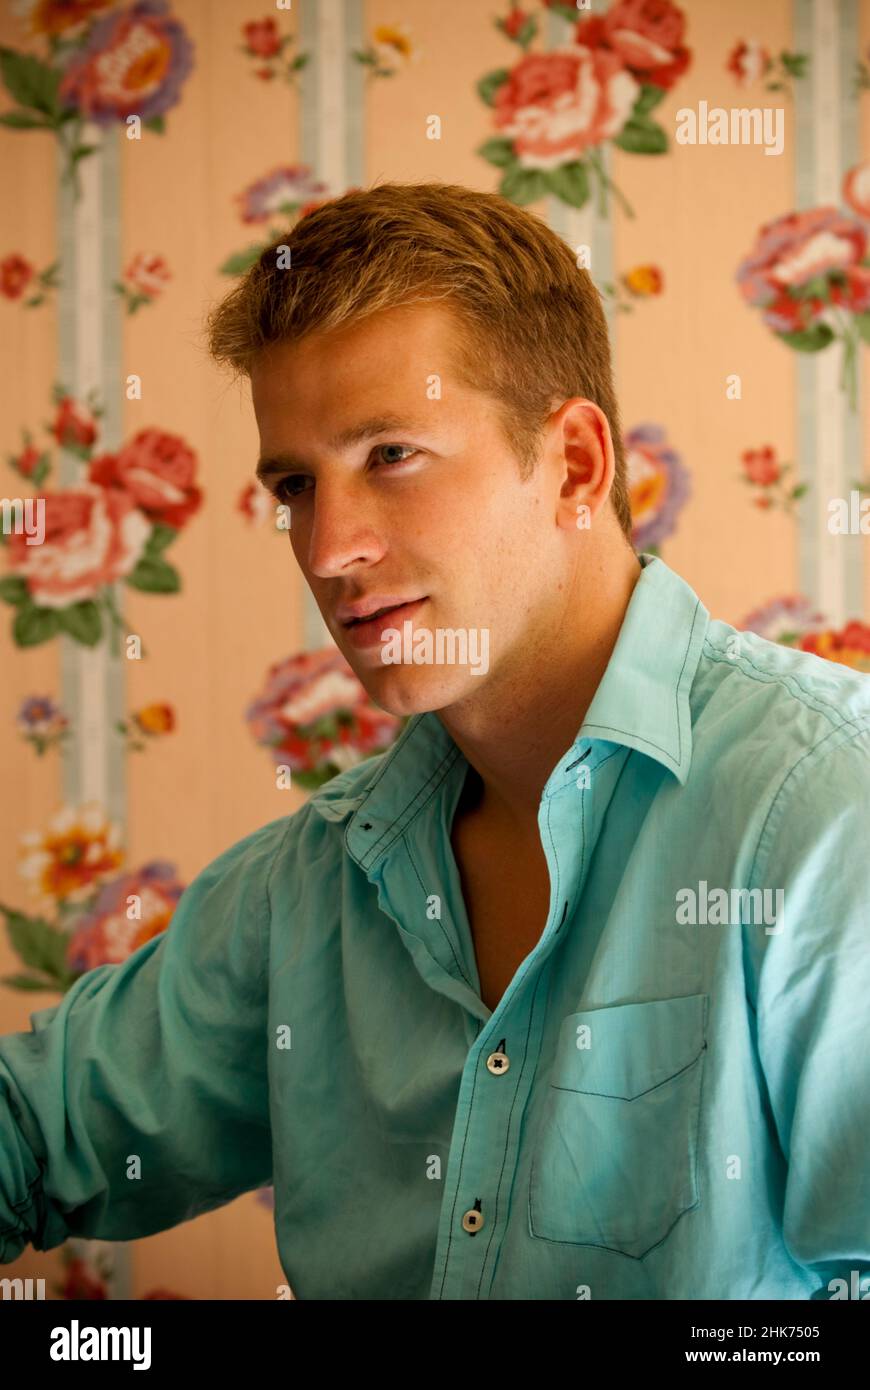 Young man seated in front of a floral wallpapered wall Stock Photo